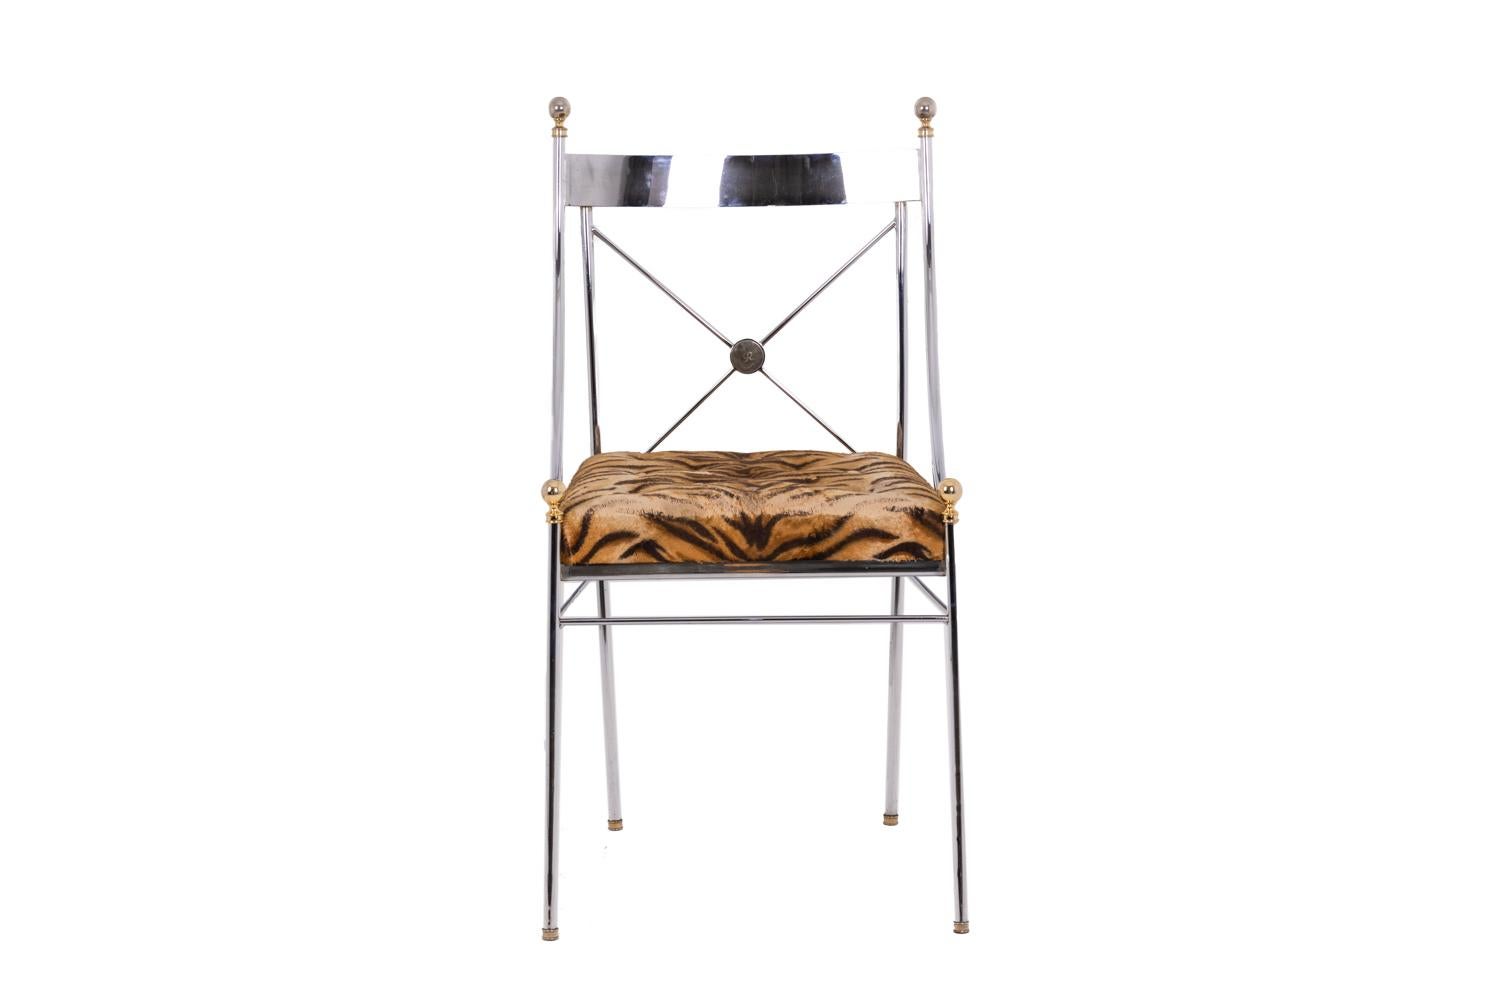 Romeo Rega, signed. 

Chair Directoire style in chromed metal, seat and backrest ending in a decorative ball. Slightly curved top of the backrest. Straight base. Seat upholstered with a printed fabric, tiger motif. Signed in the center of the